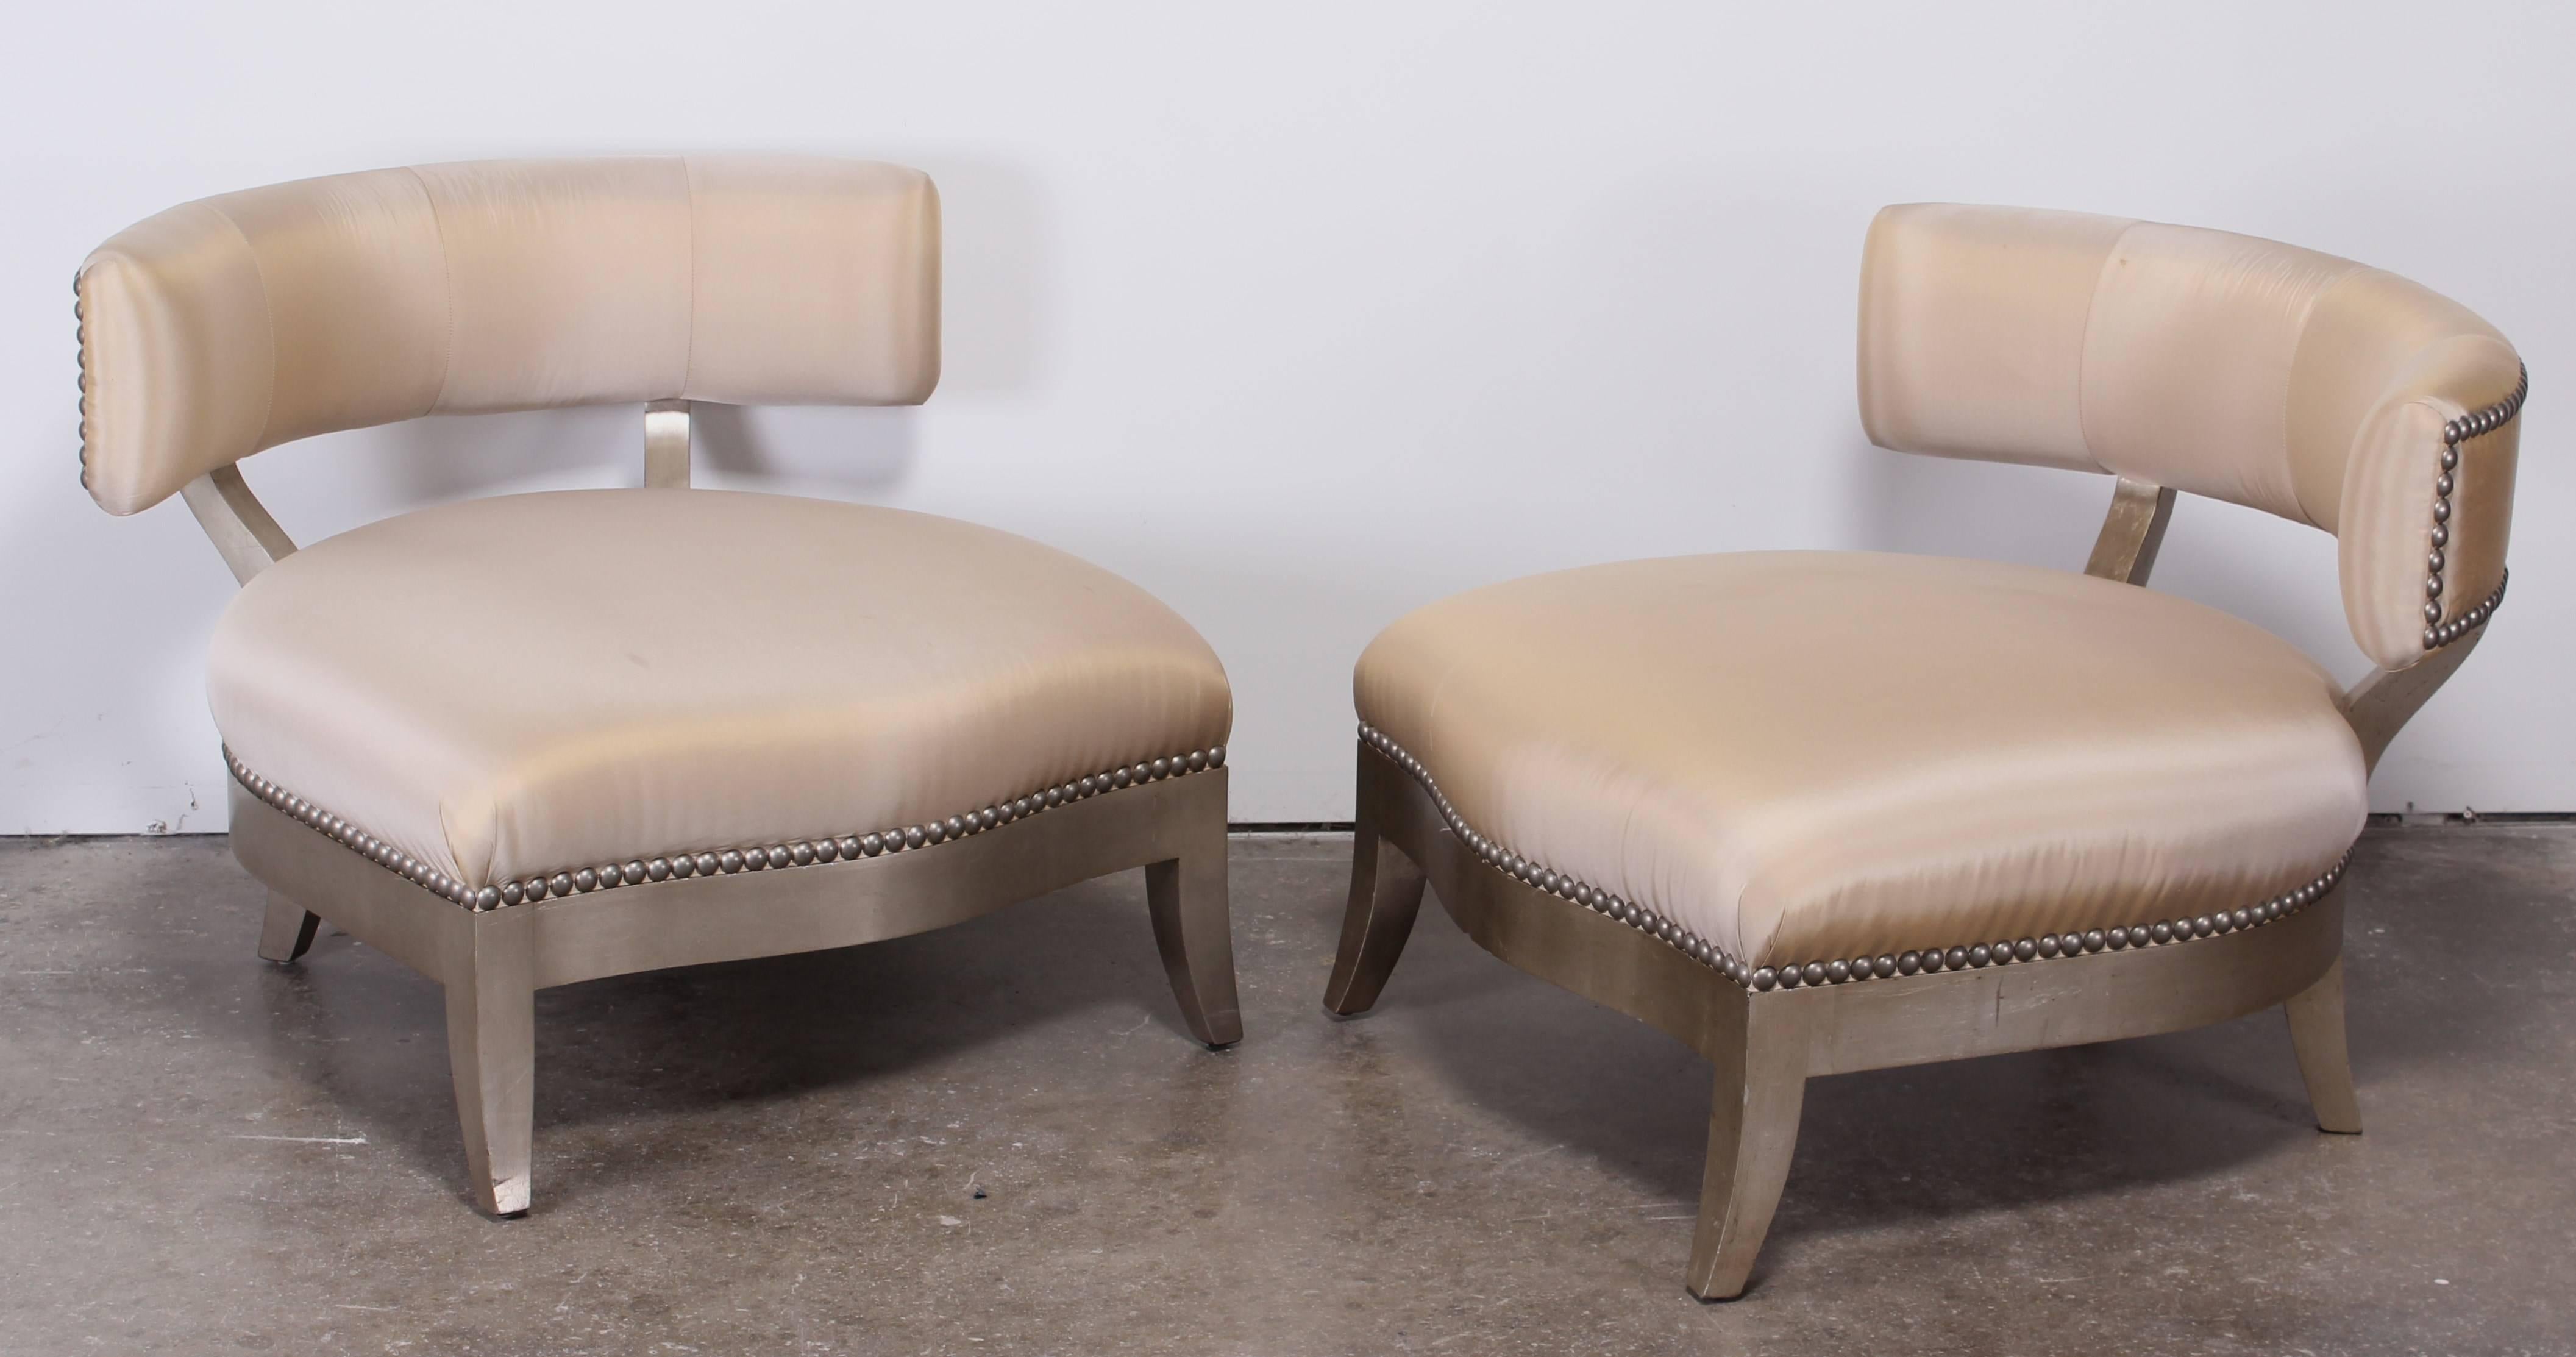 Pair of Marge Carson Santorini chairs. A stunning pair of Hollywood Regency silver leaf Marge Carson 